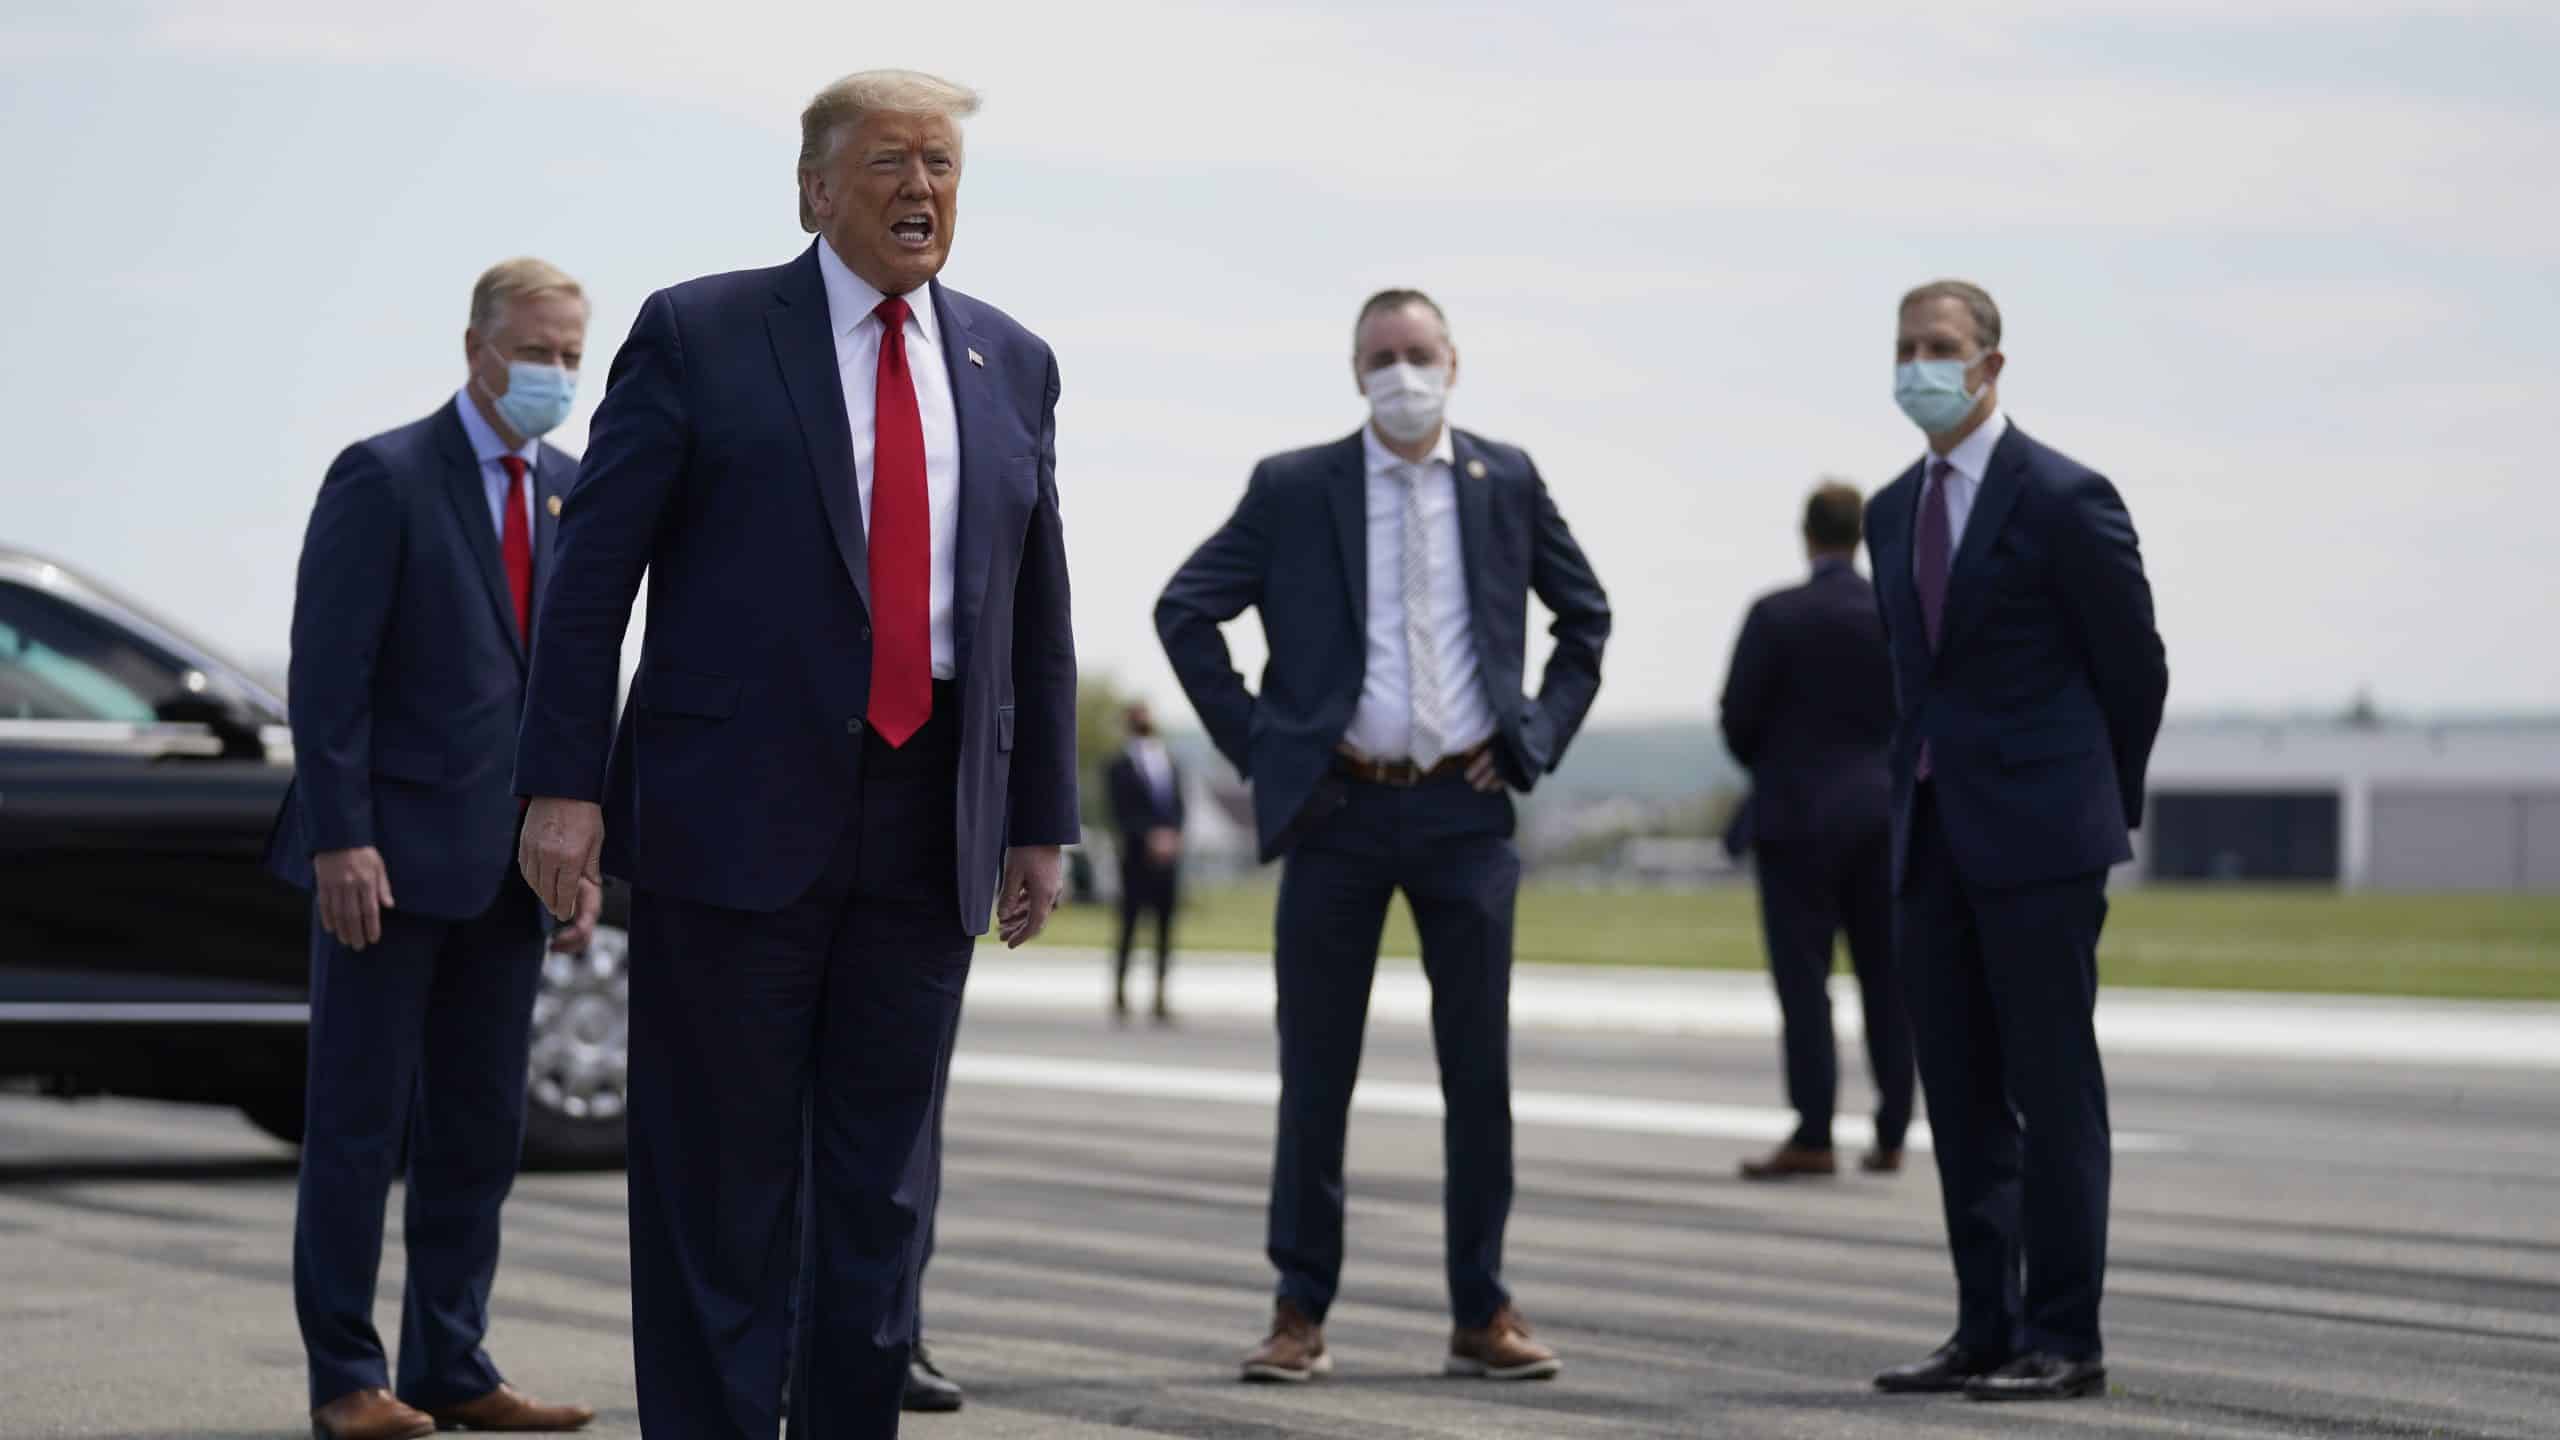 Doctor tells Trump: Give us face masks not flyovers